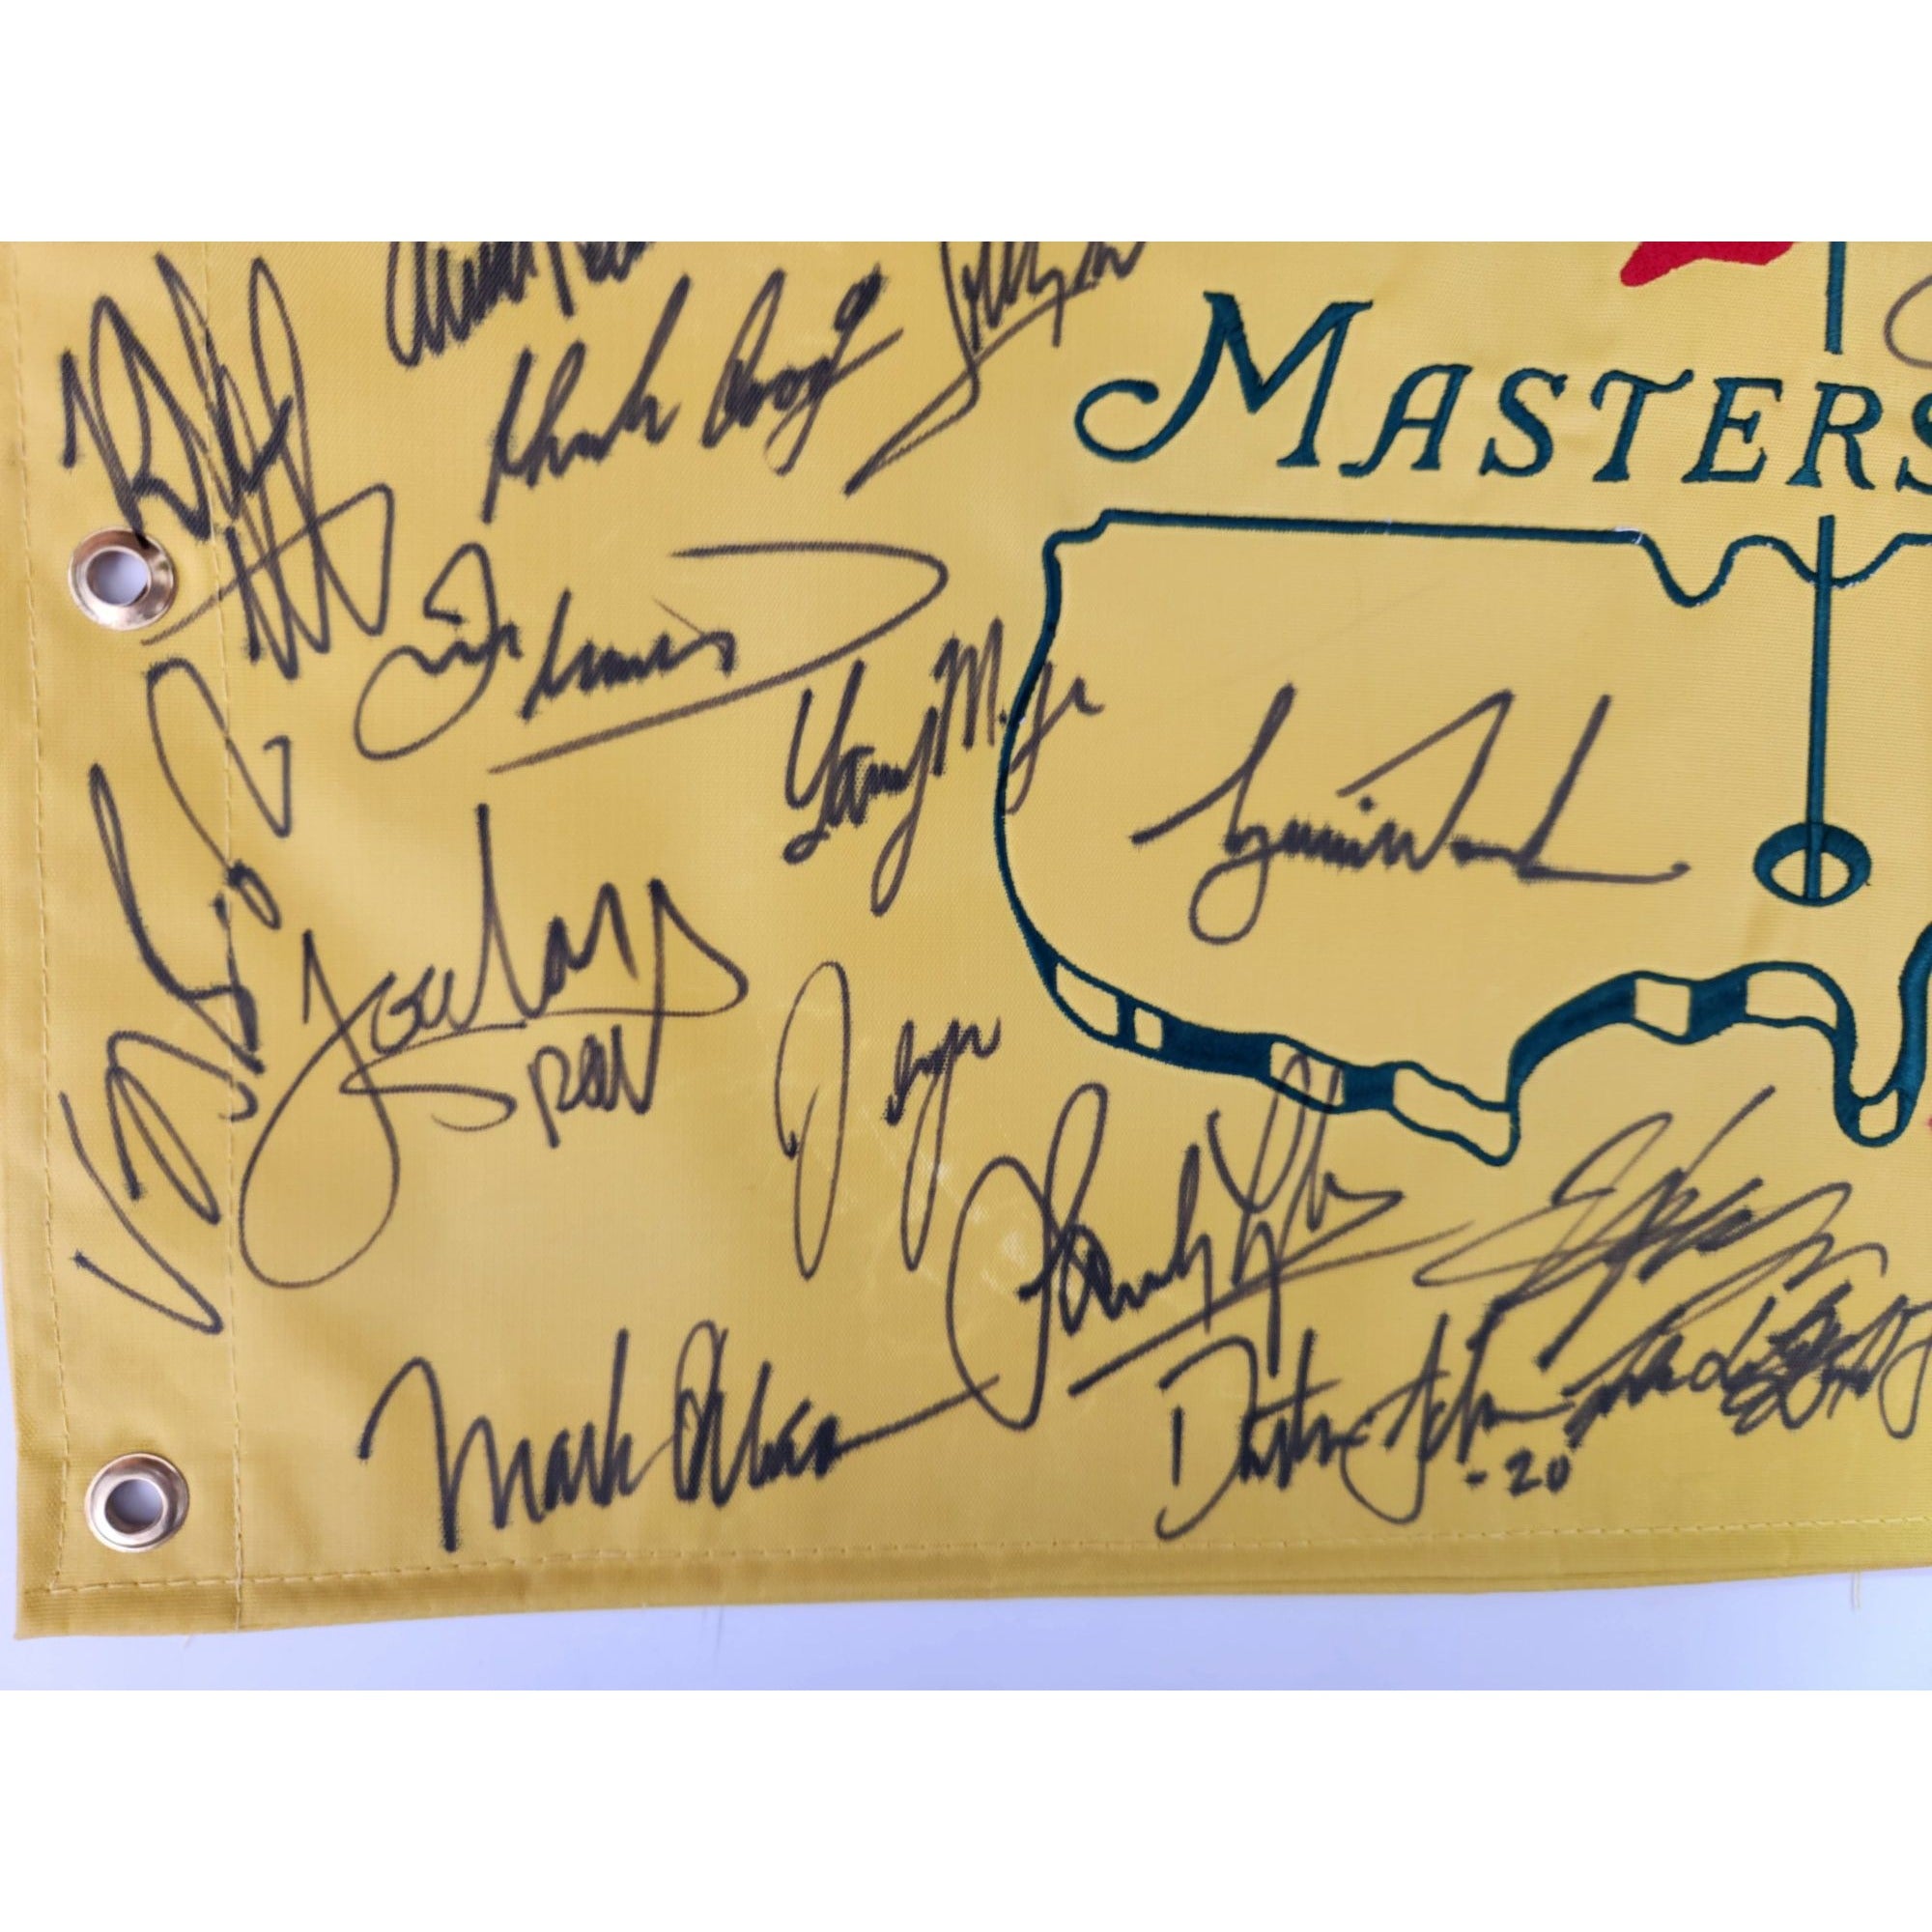 Masters champions Sam Sneed Jack Nicklaus Tiger Woods Arnold Palmer Phil Mickelson 30 former Champions signed with proof